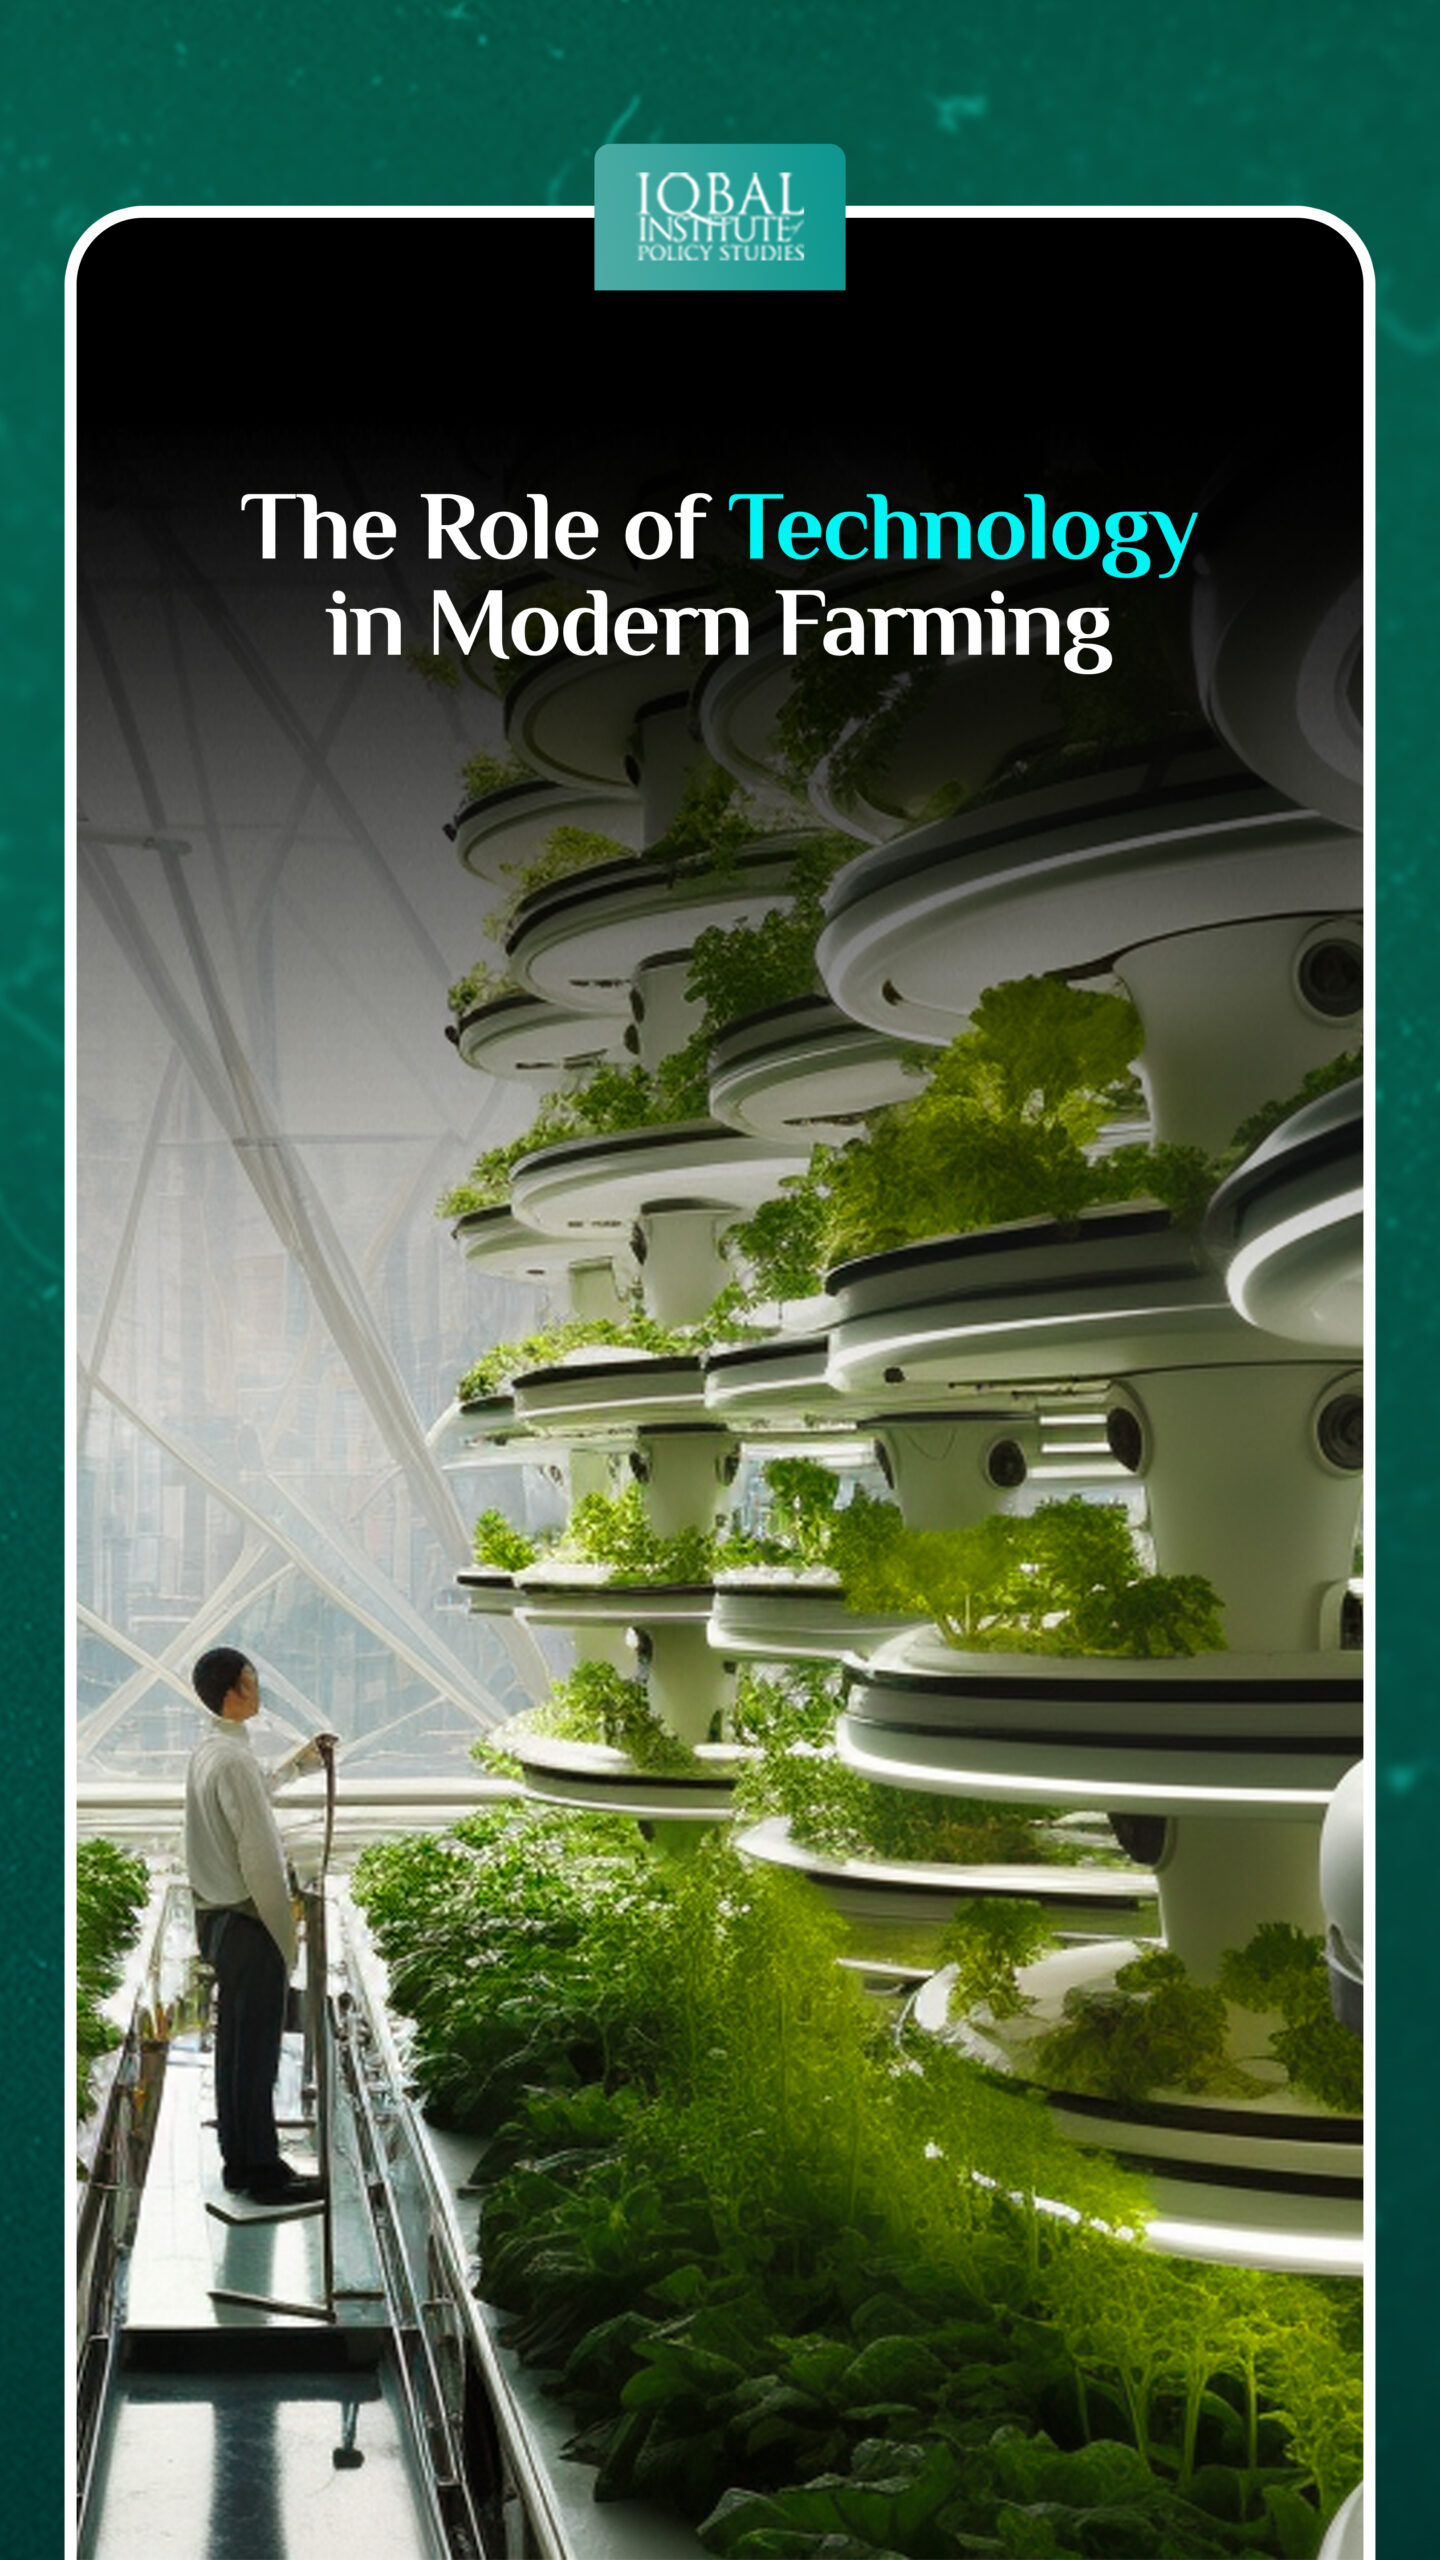 The role of technology in modern farming